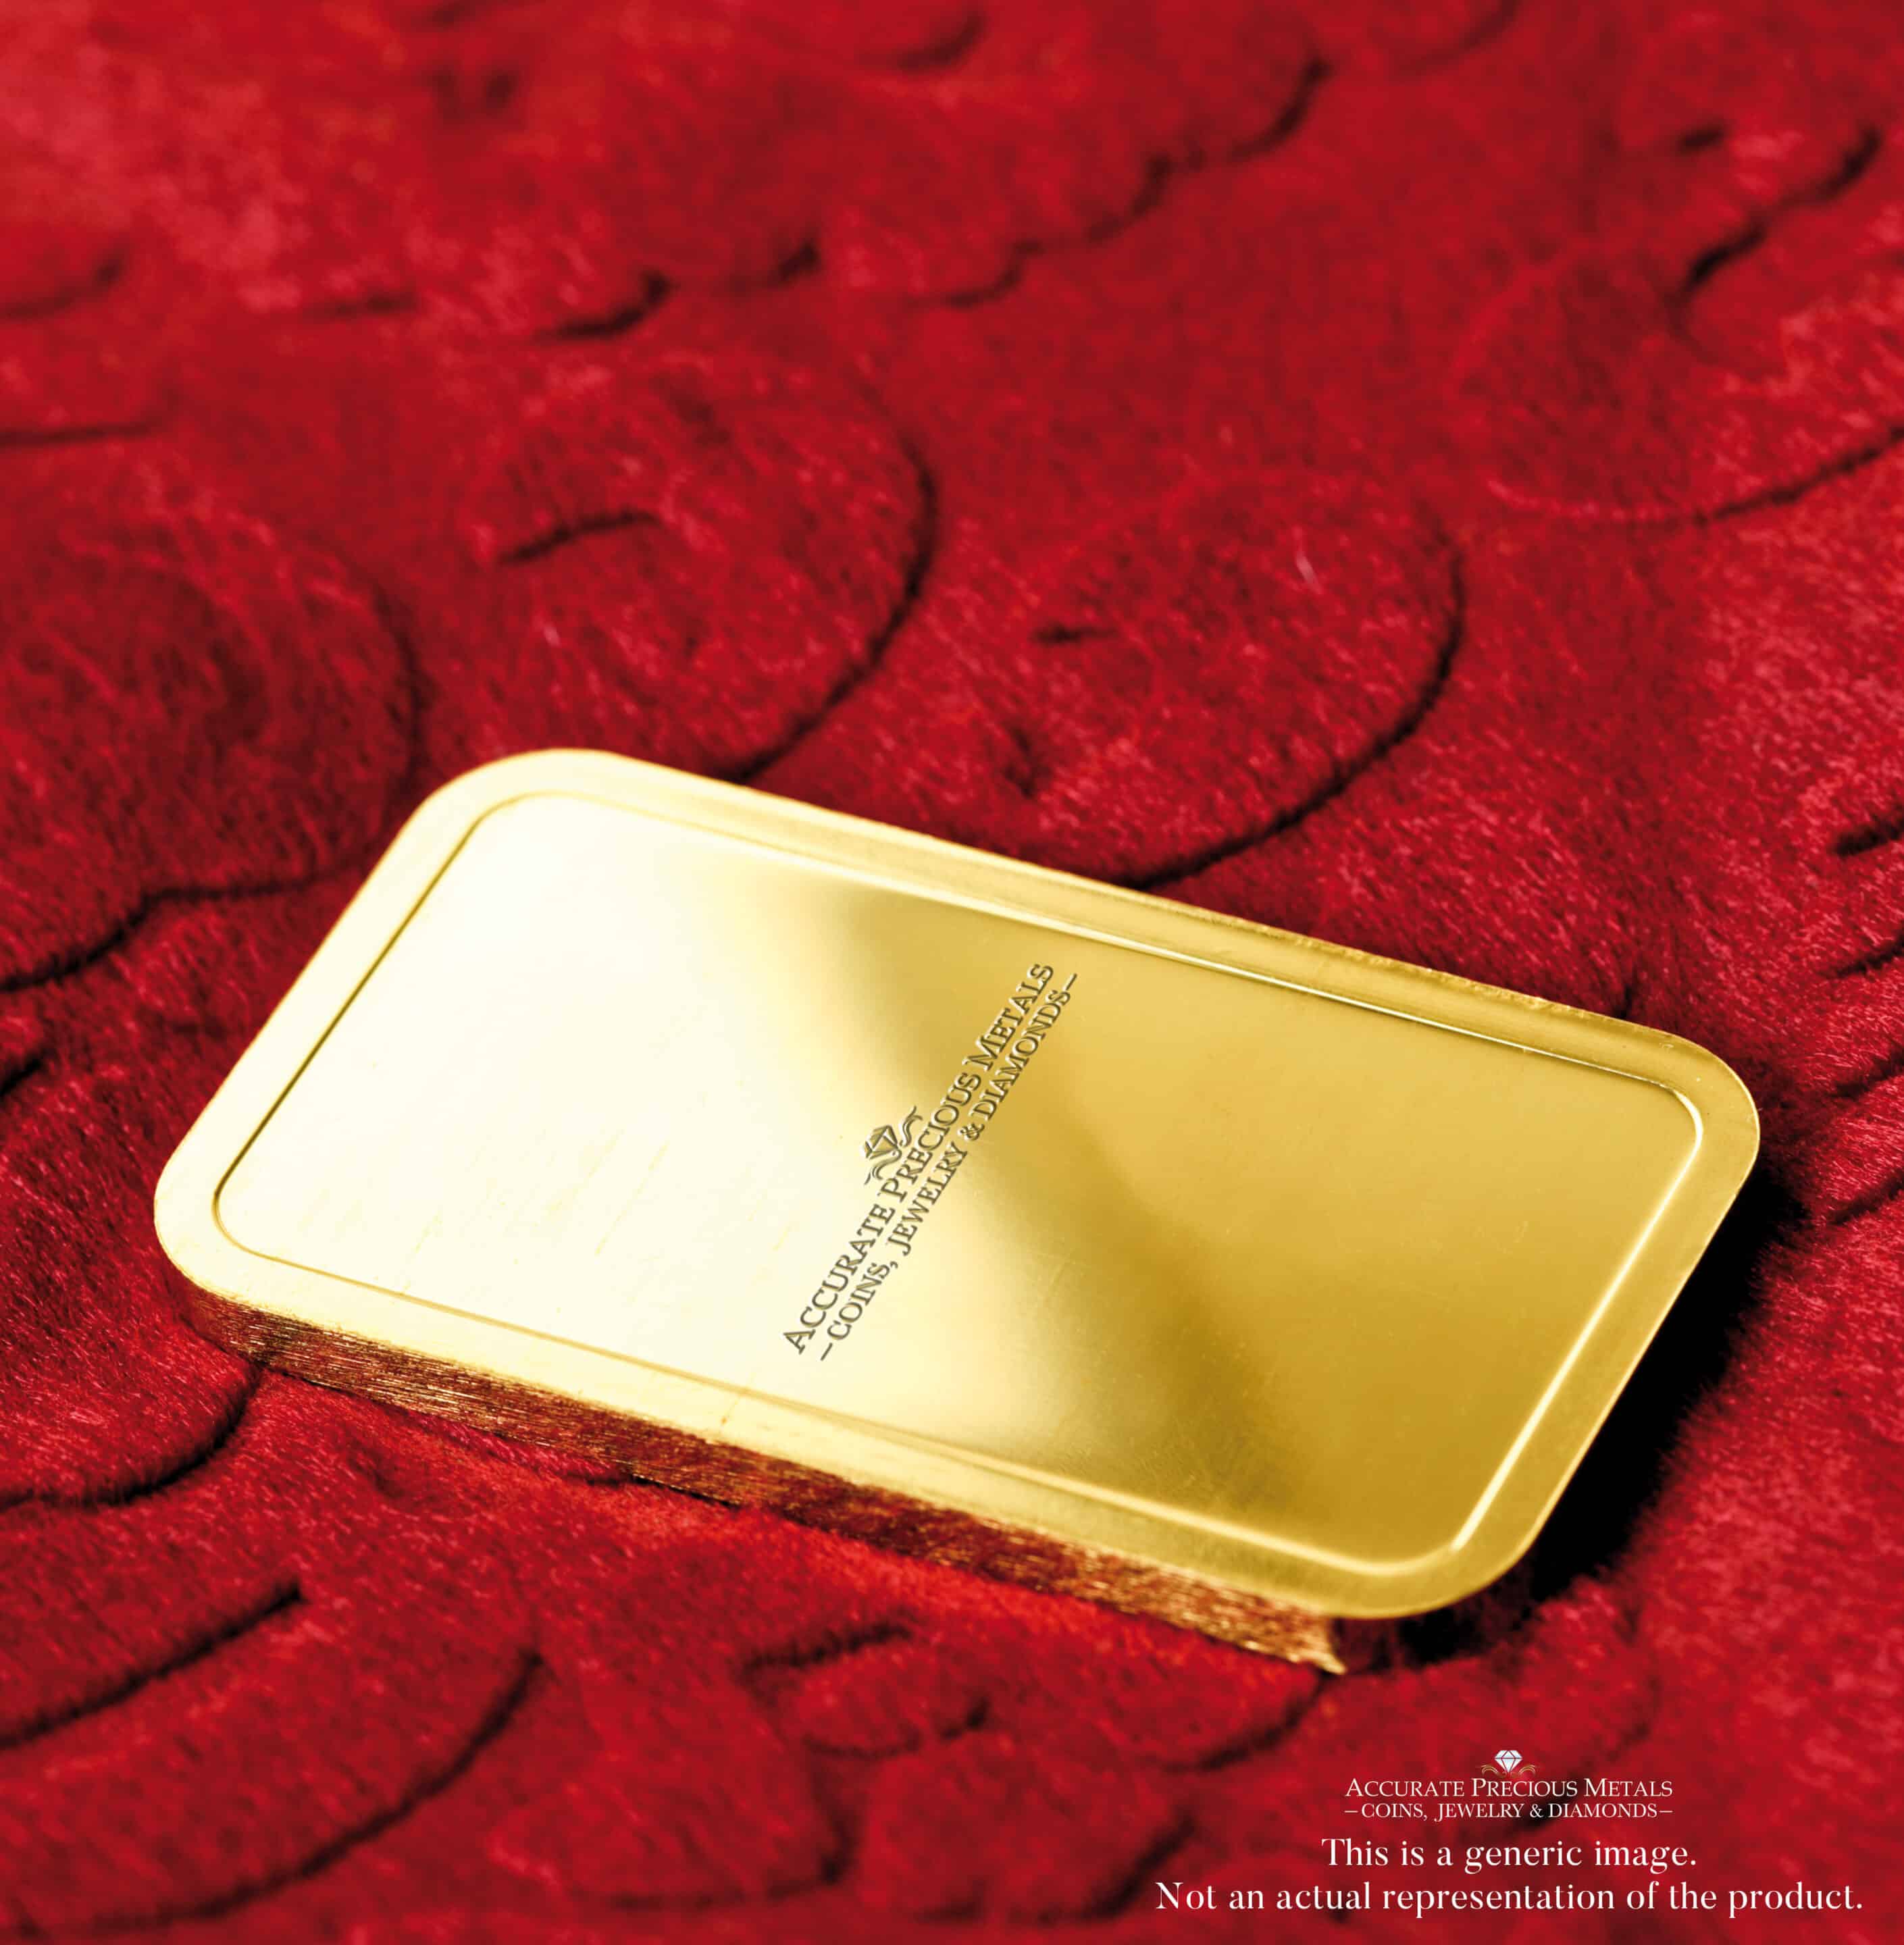 ohnson Matthey 1/10 oz Gold Bar - Preserve Your Wealth with Precious Metal